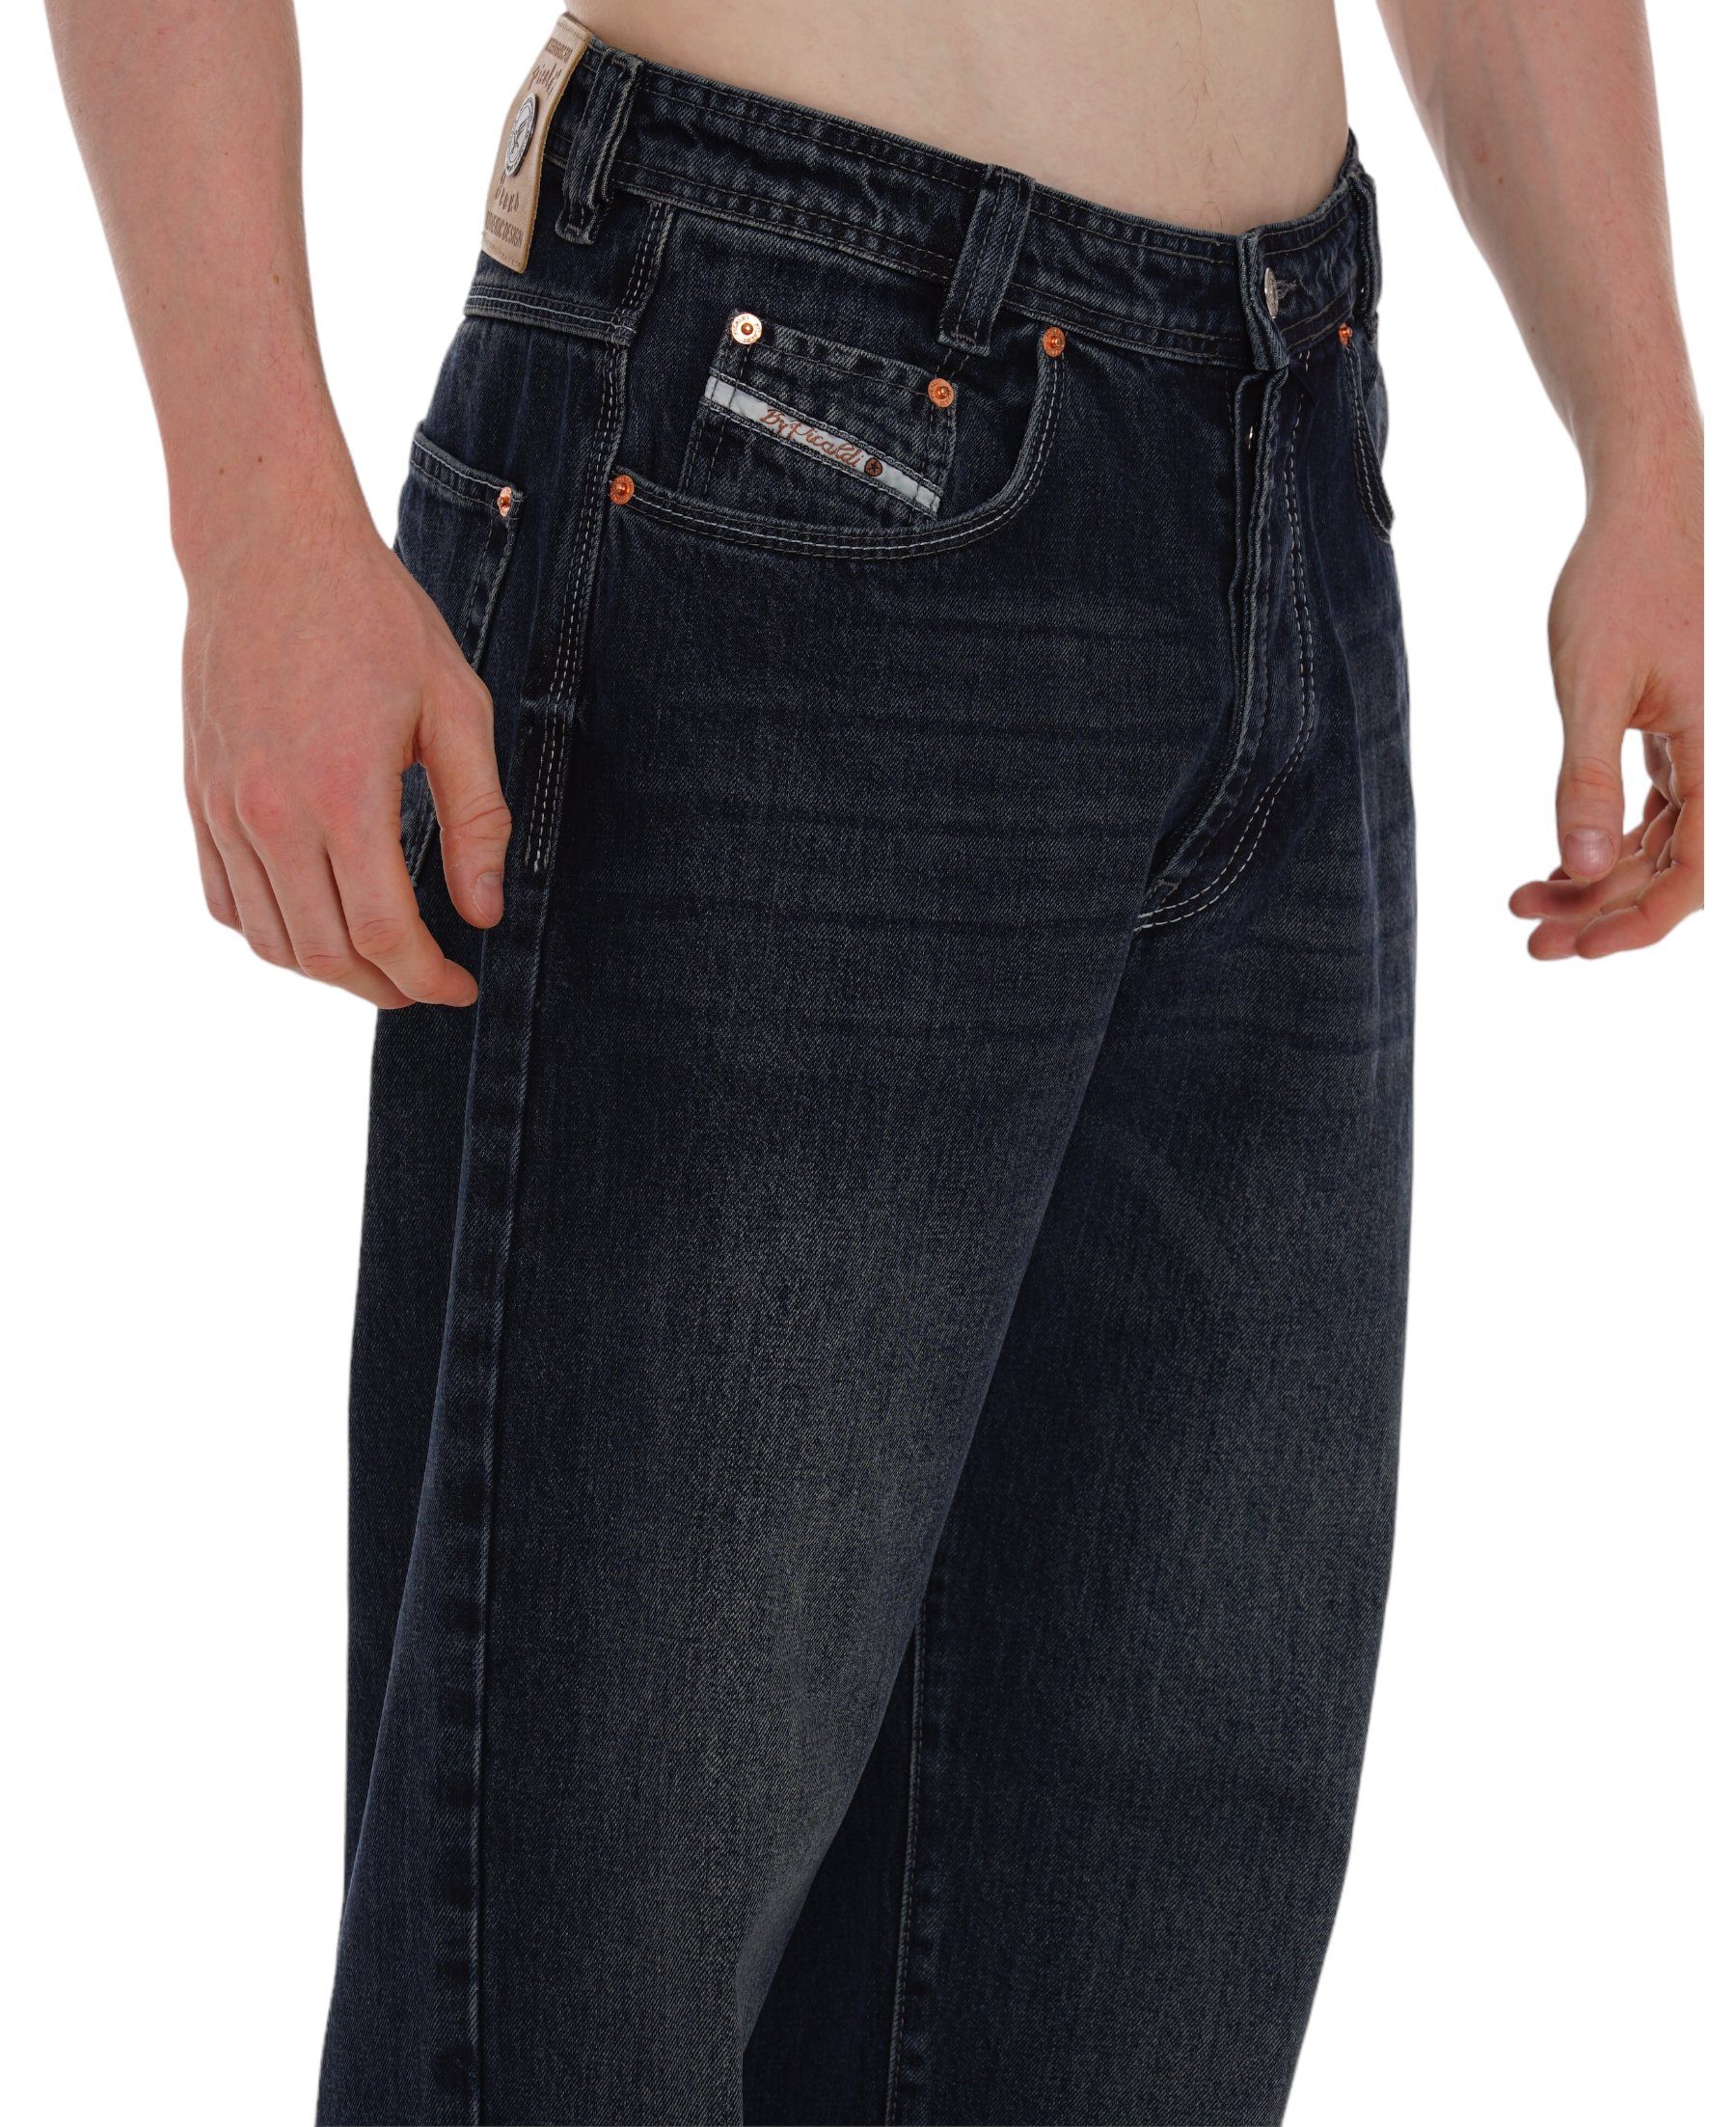 471 Fit, Zicco PICALDI Loose Miracle Five Jeans Pocket Jeans Jeans Weite